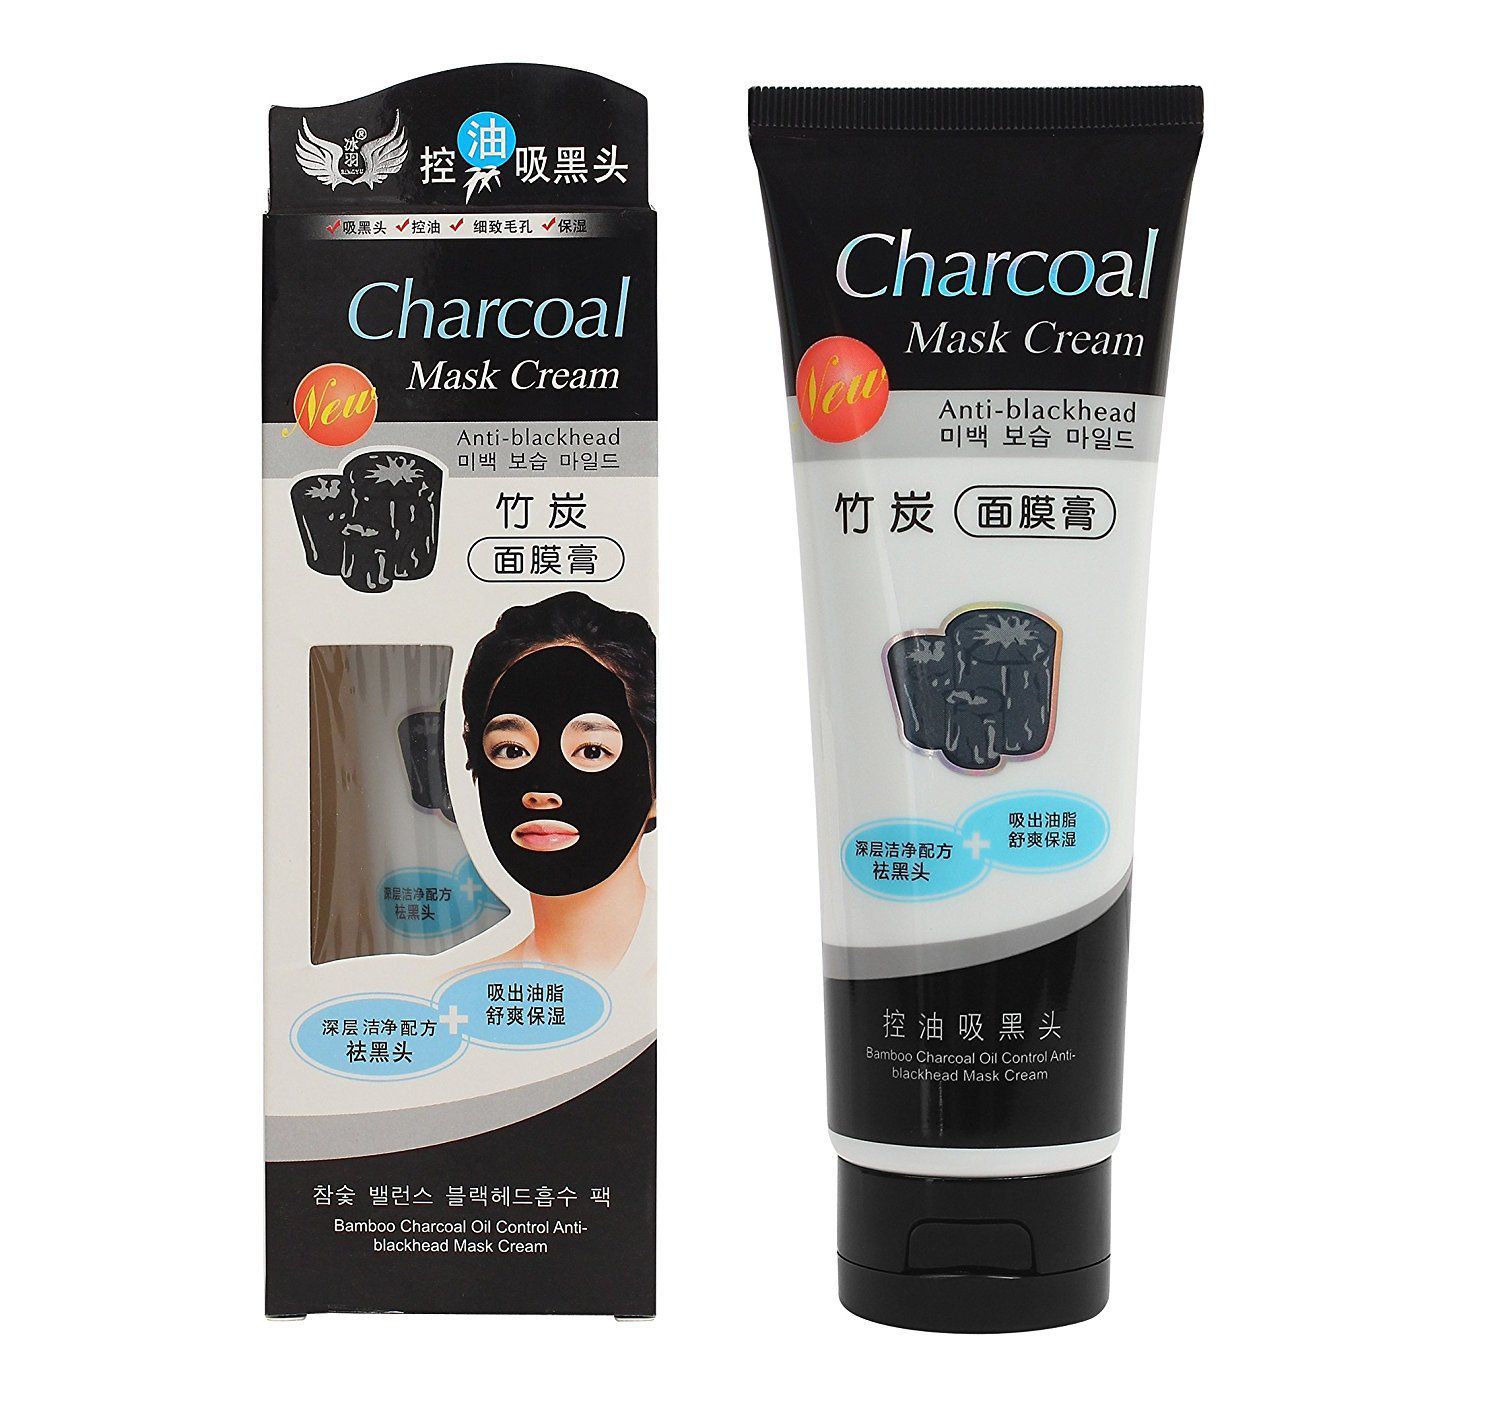 charcol face mask